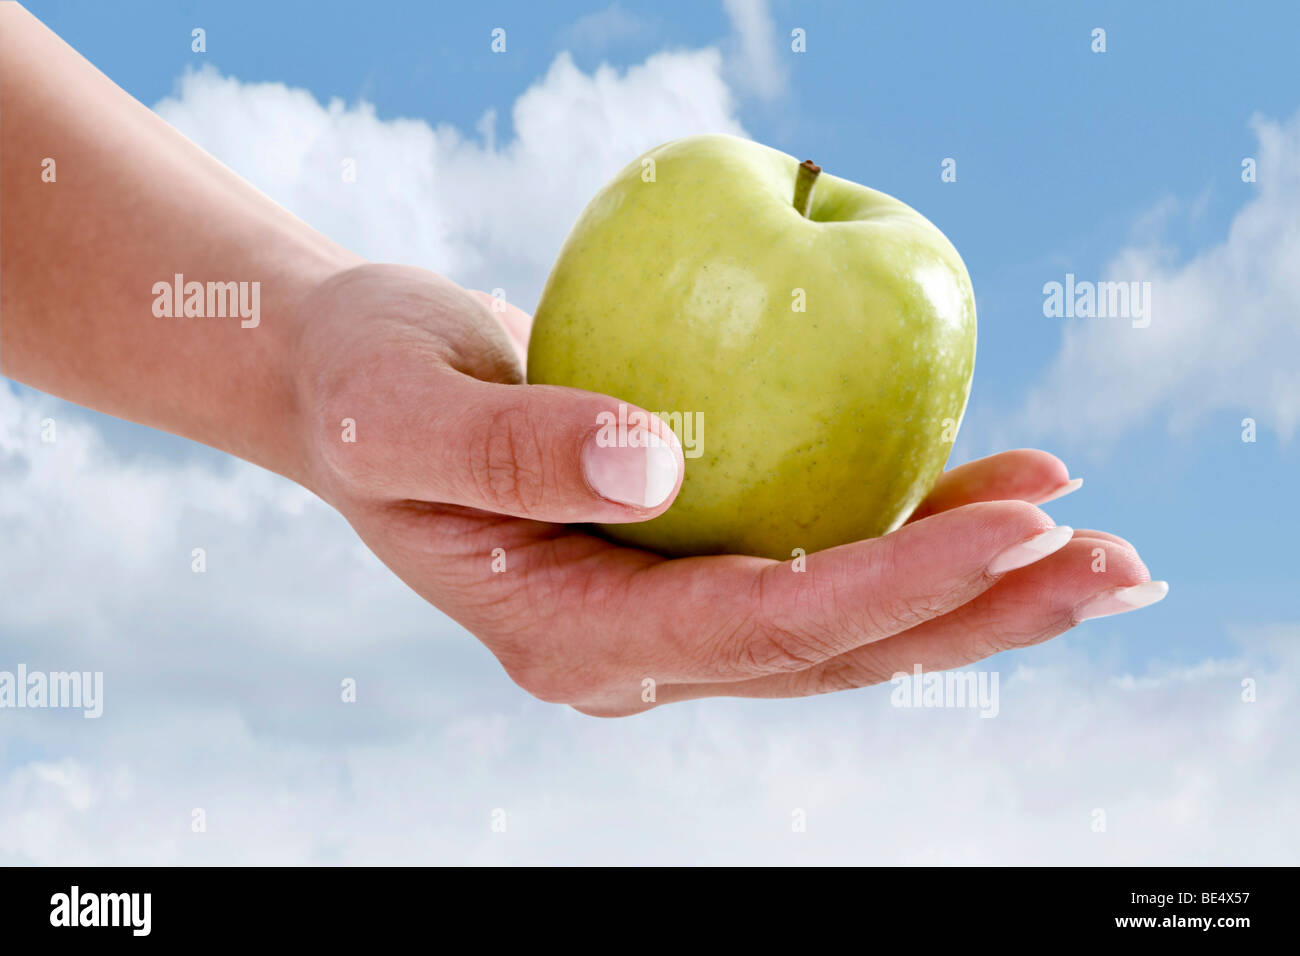 Hand holding a green apple against a blue sky Stock Photo